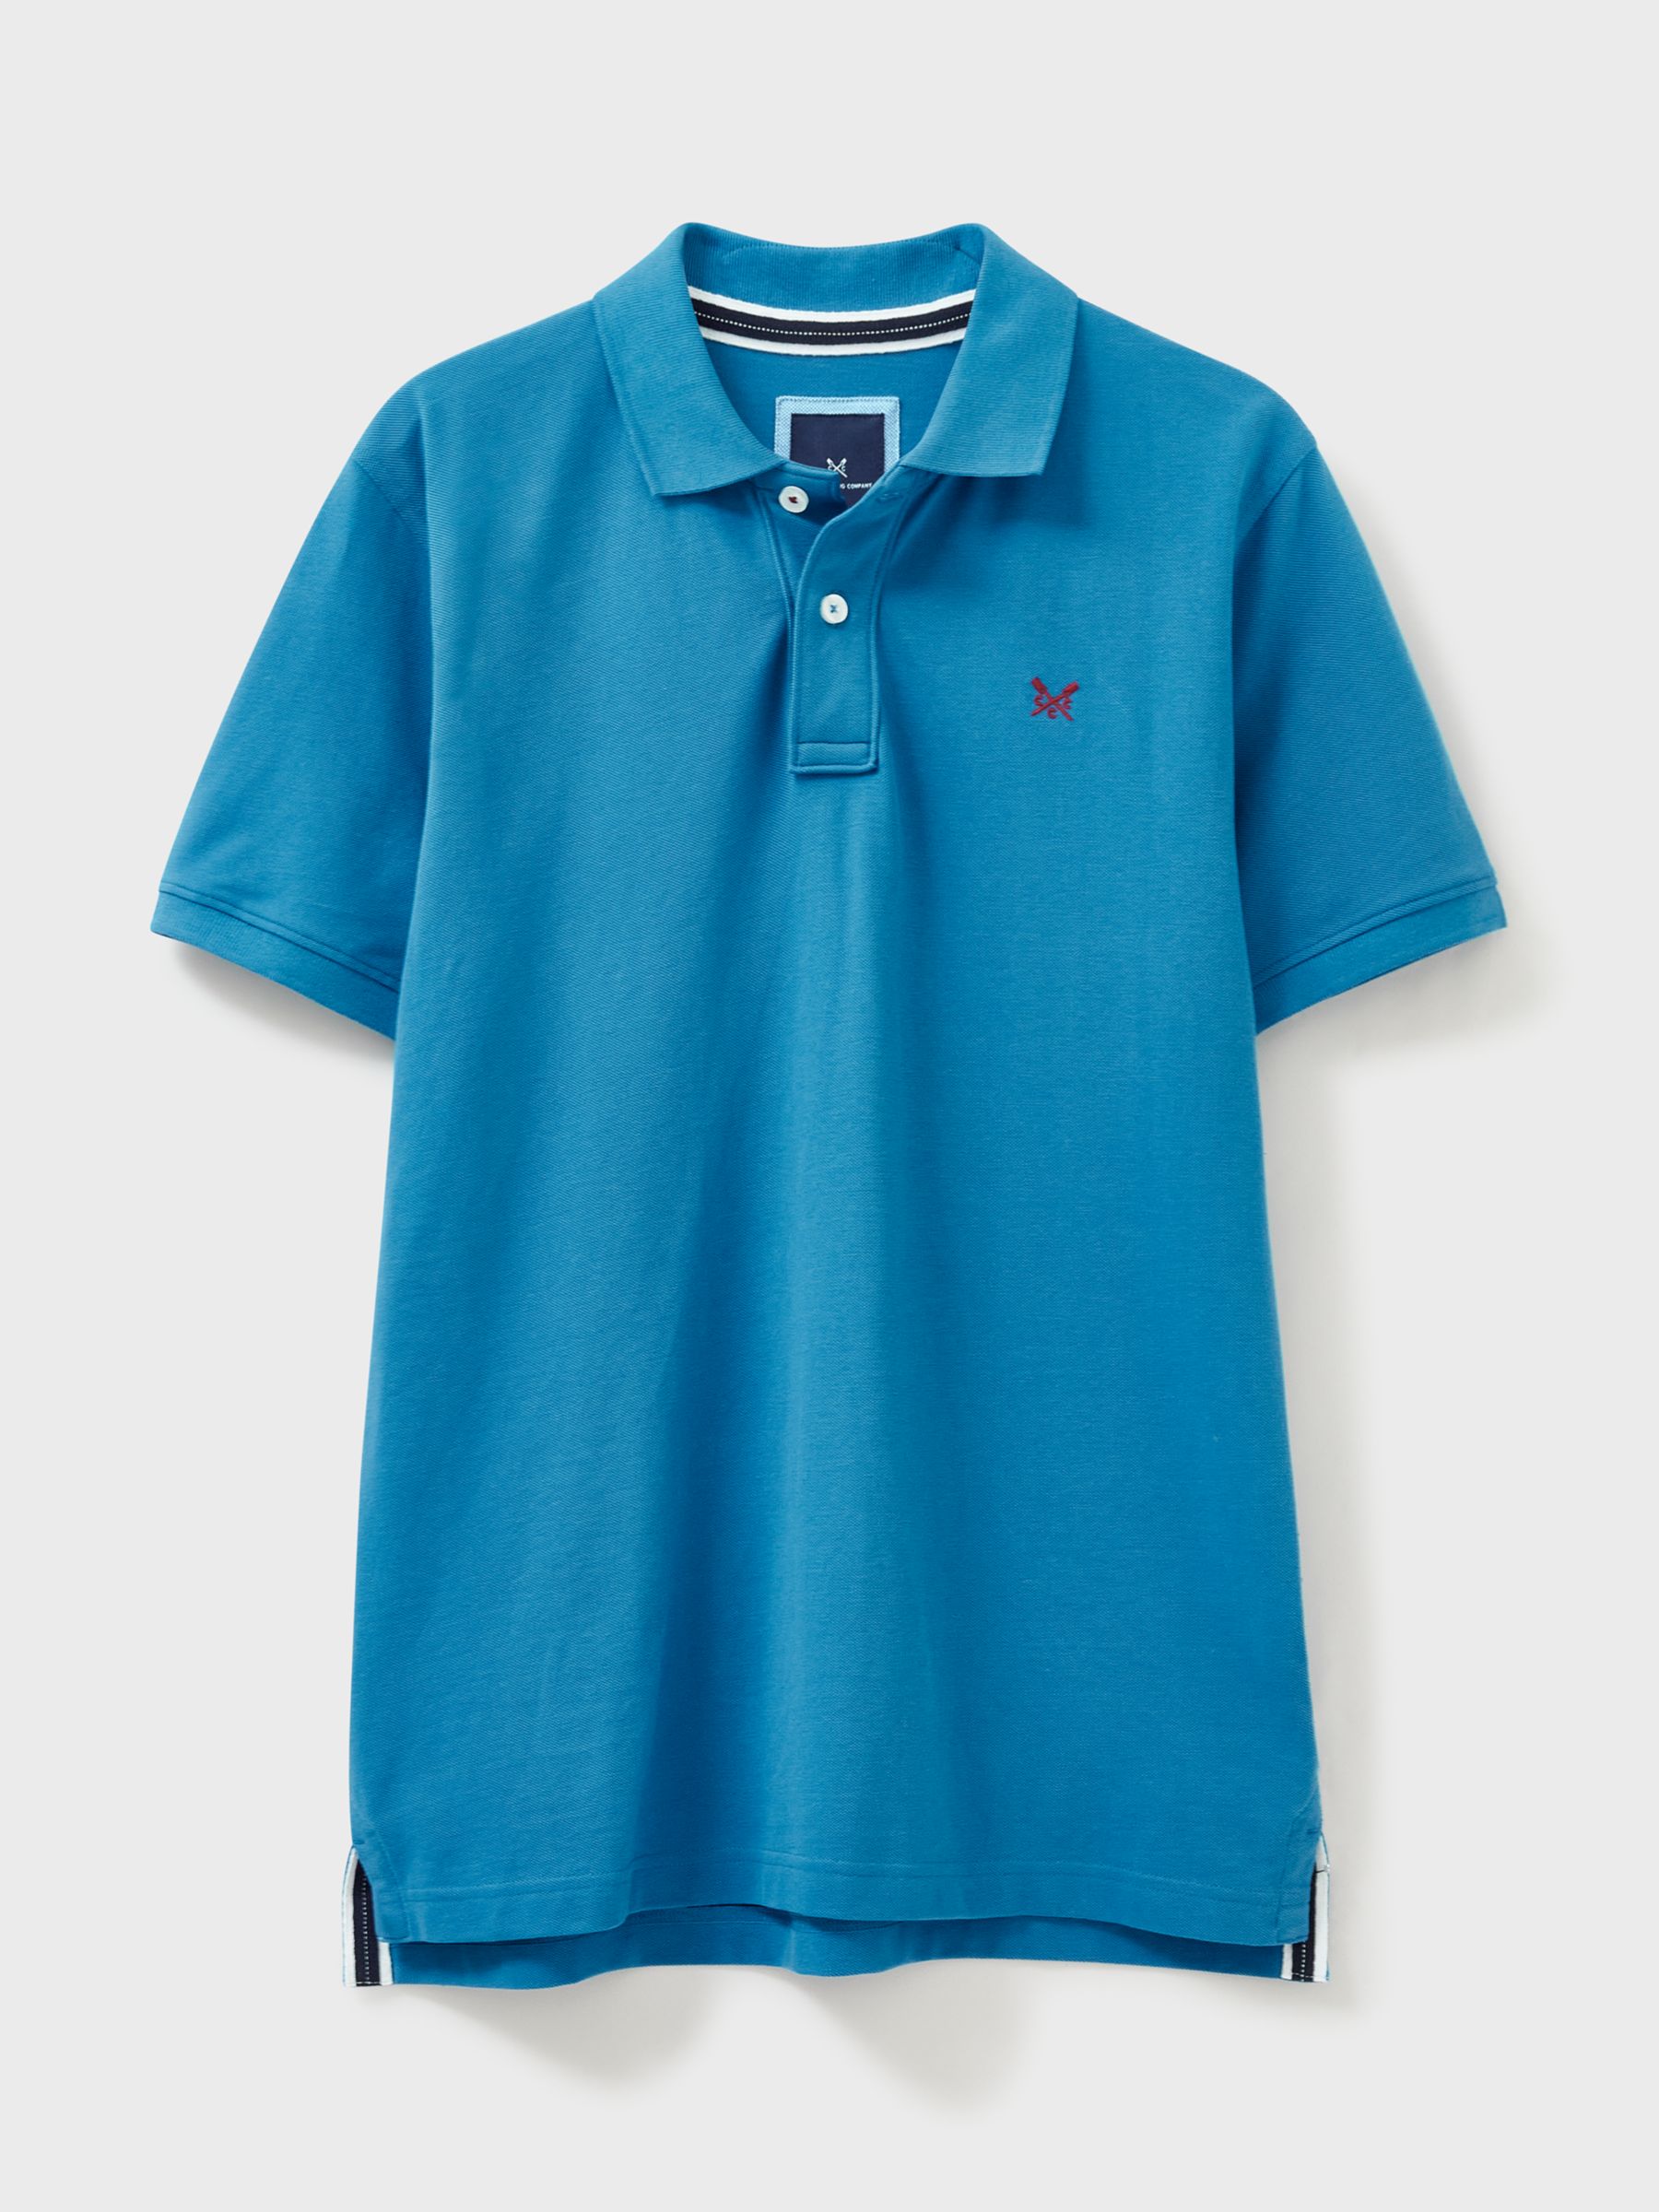 Crew Clothing Classic Pique Polo Shirt, Blue at John Lewis & Partners